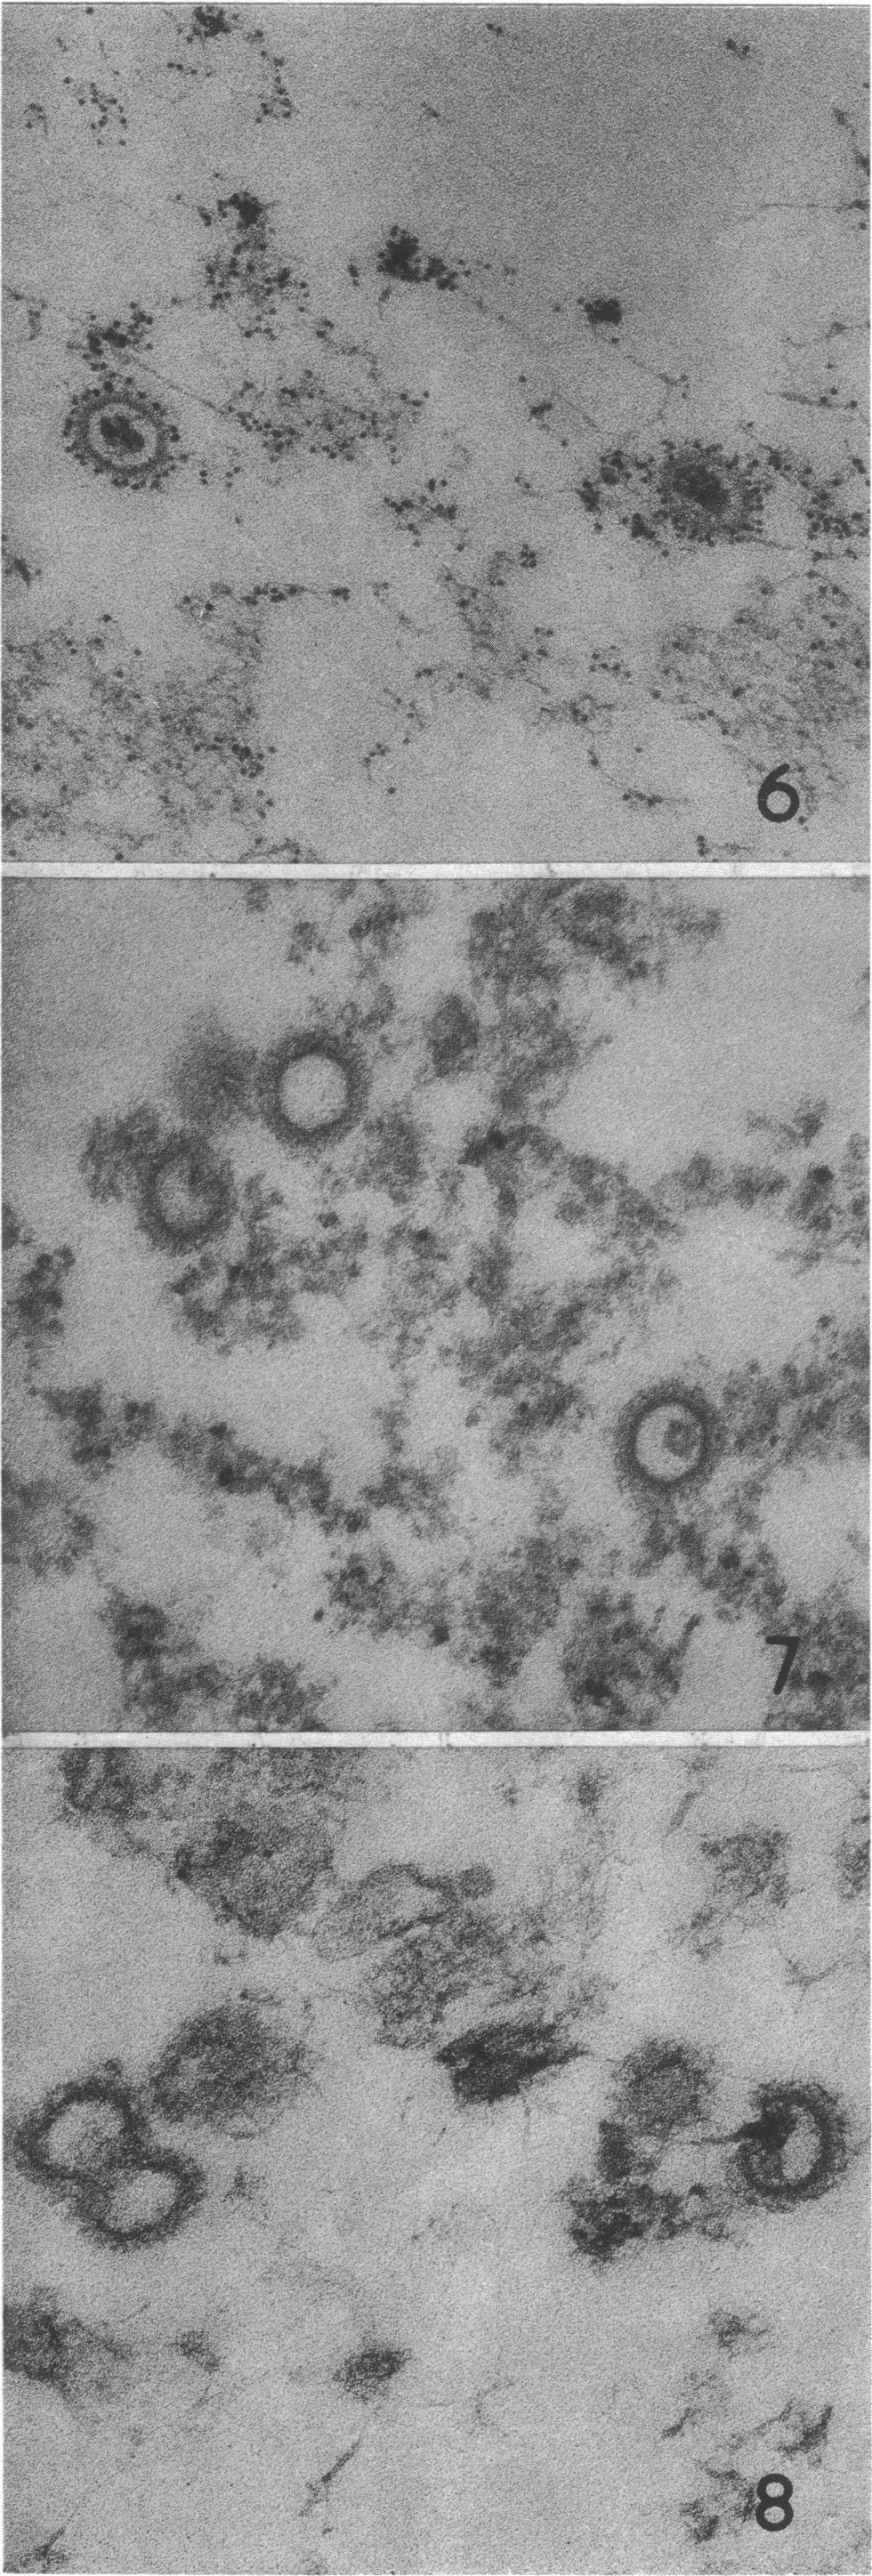 1410 Microbiology: Hampar et al Proc Nat Acad Sci USA 68 (1971) * nweaktagging of HTV particles when reacted twice with HR1K cells The three rabbit anti-htv conjugates showed ferritin tagging of HTV